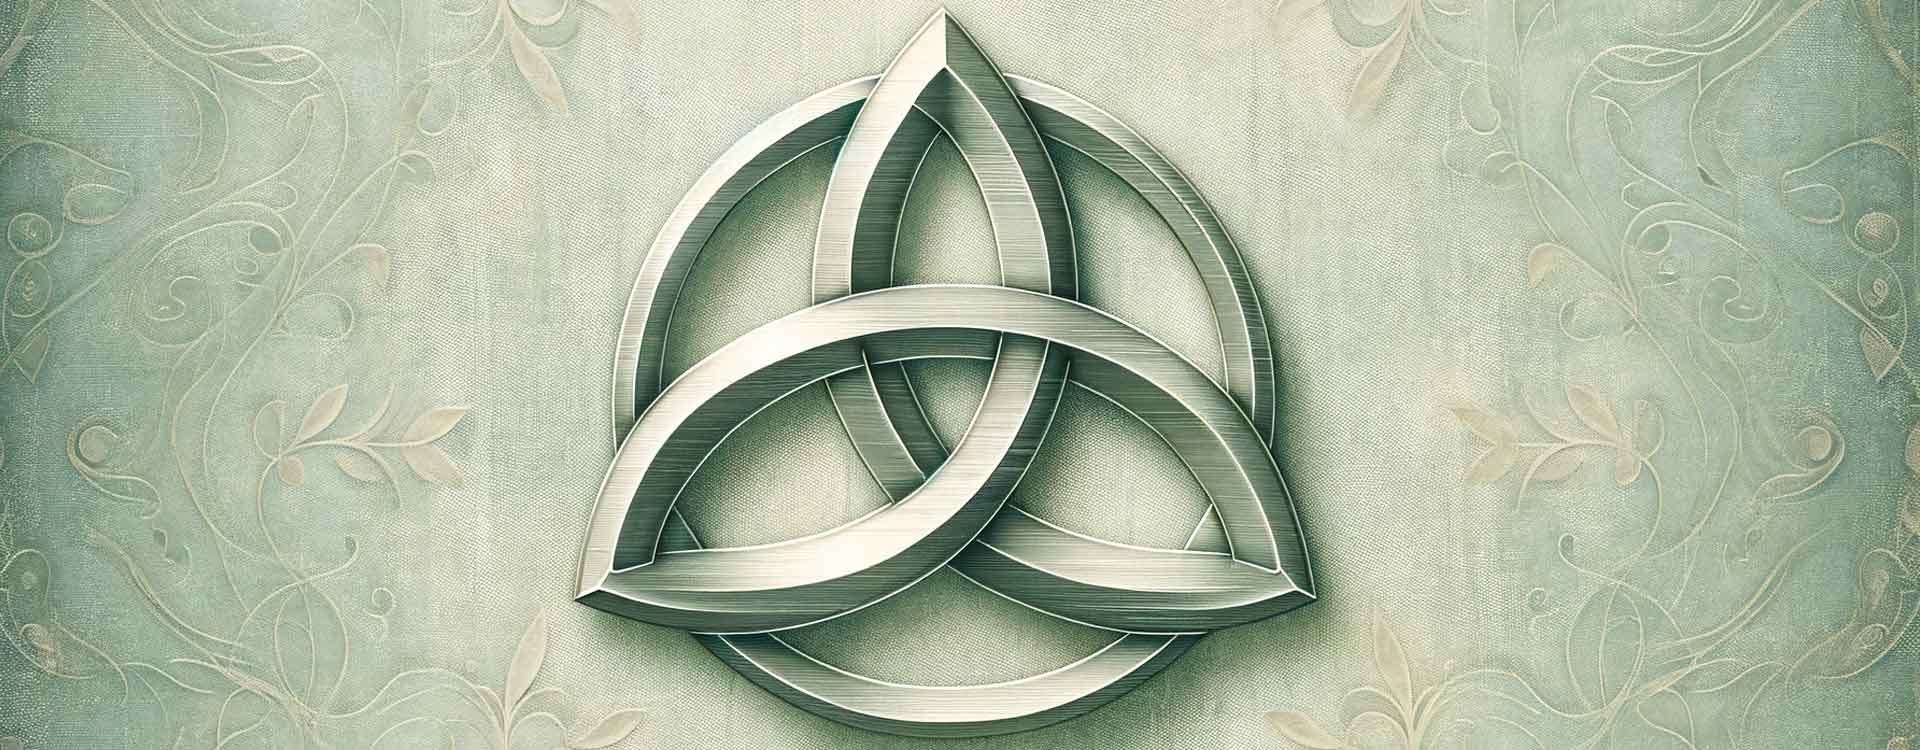 Love's Eternal Dance: The Significance of the Trinity Knot